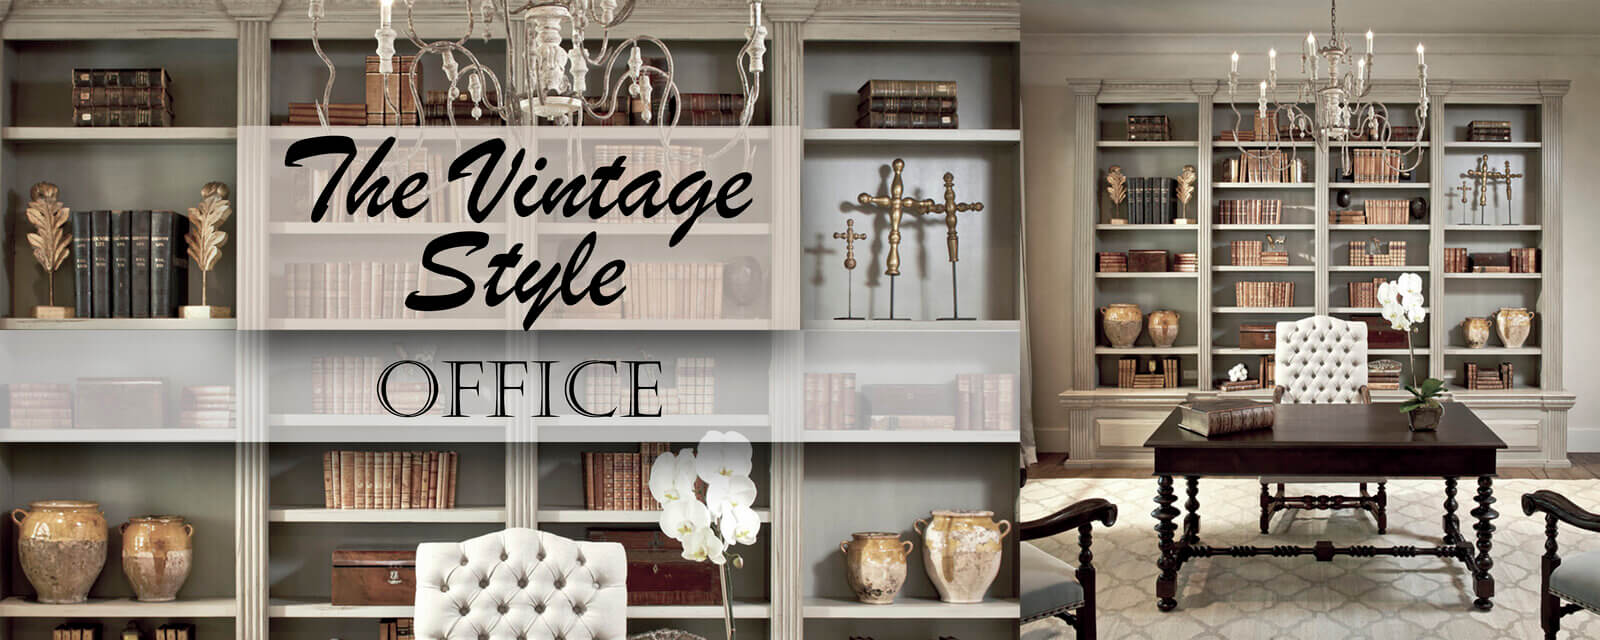 The Vintage Style | Office